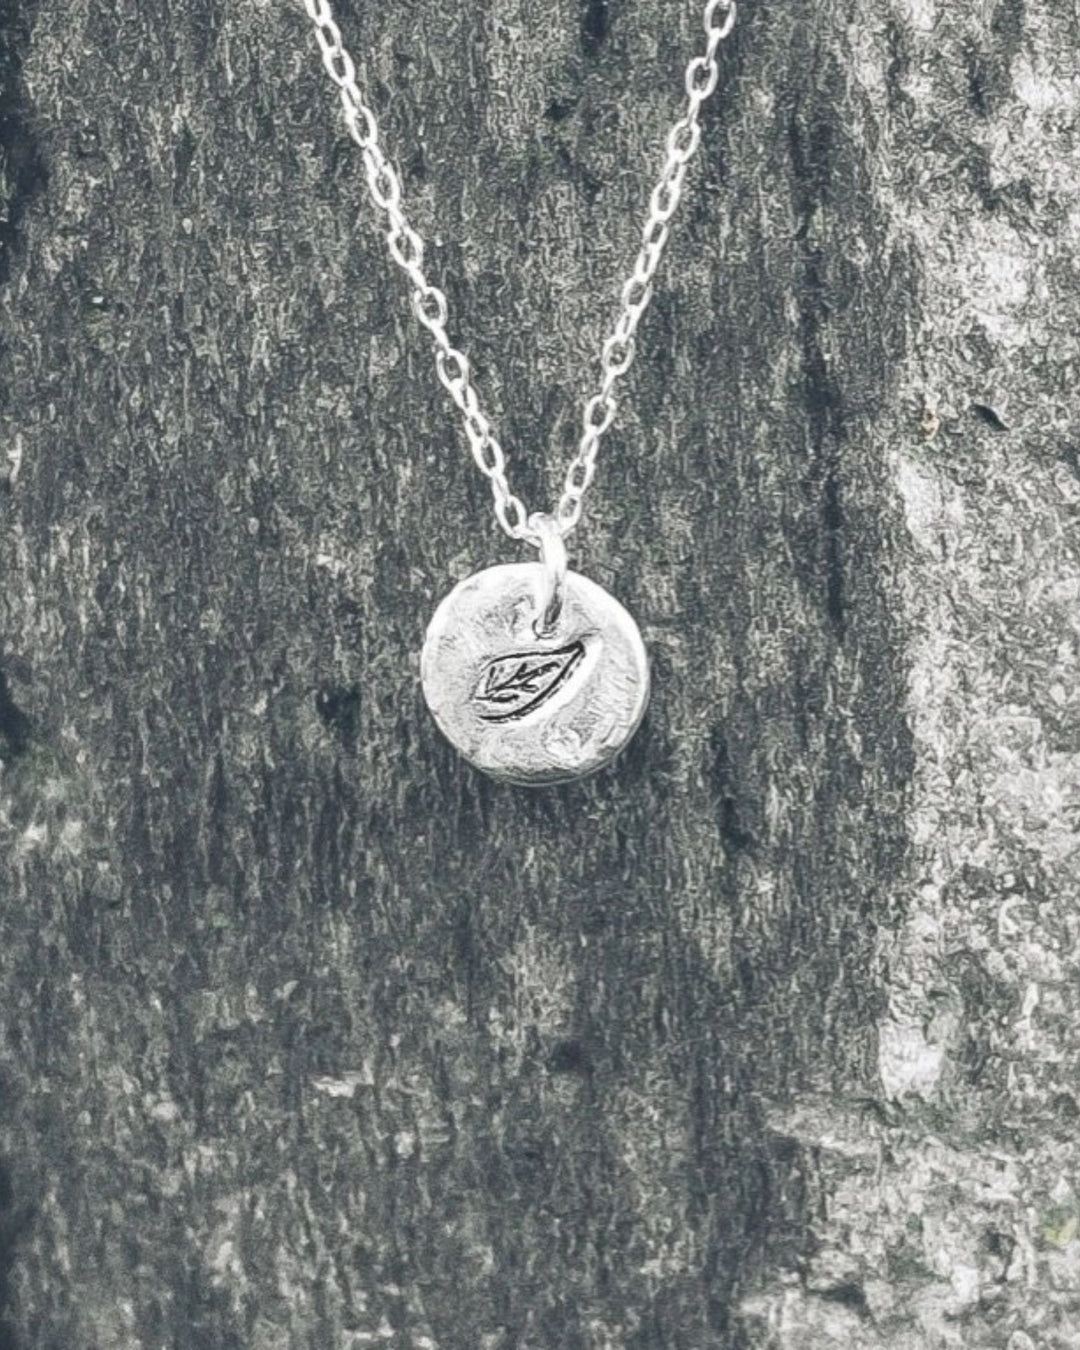 Leaf silver charm necklace